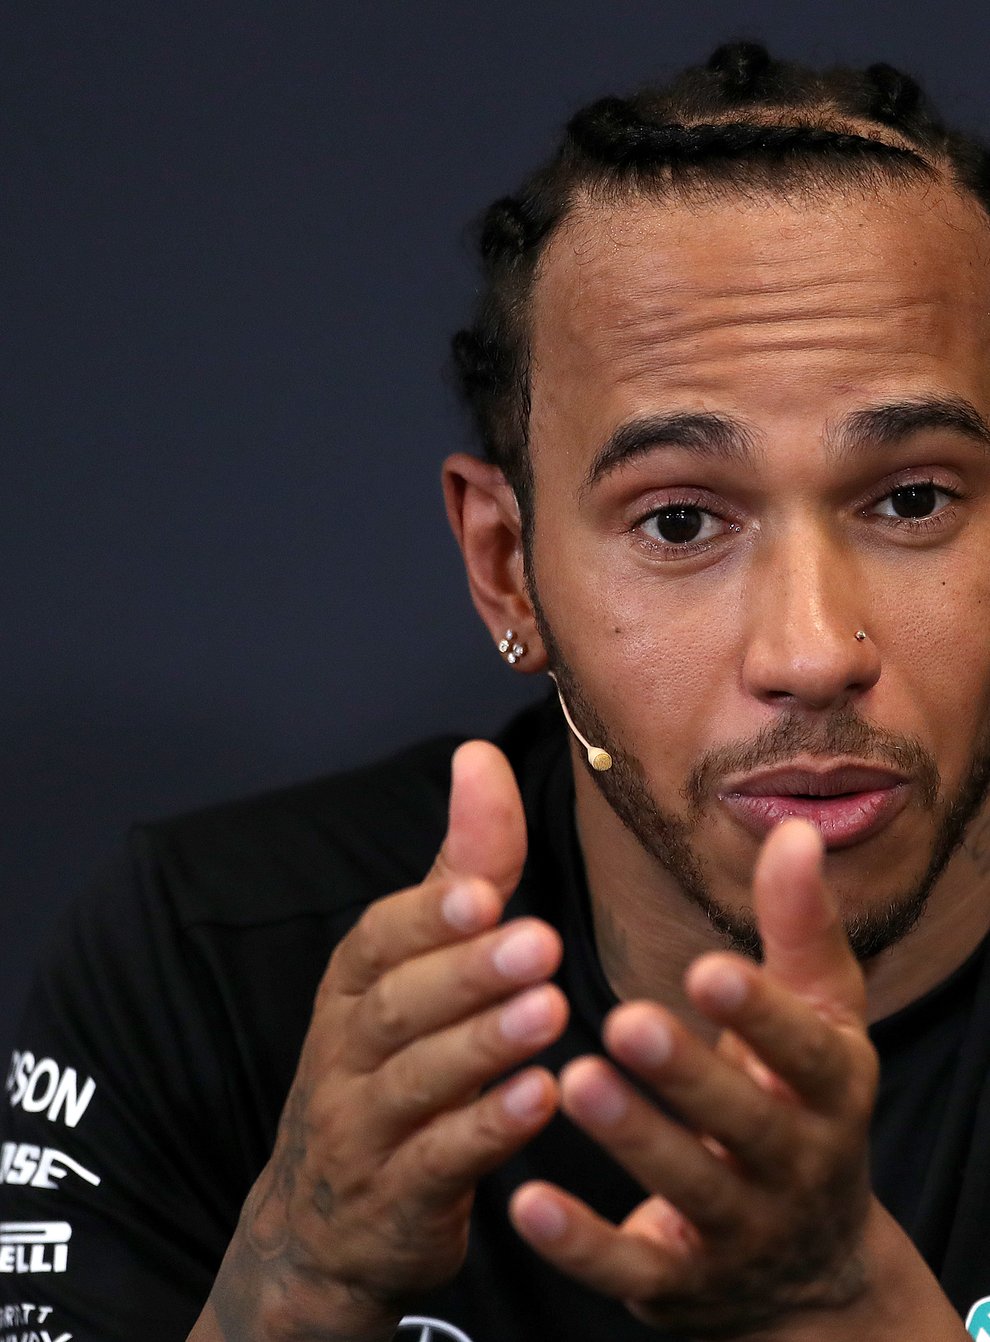 Lewis Hamilton's Mercedes will have a black livery for the 2020 season